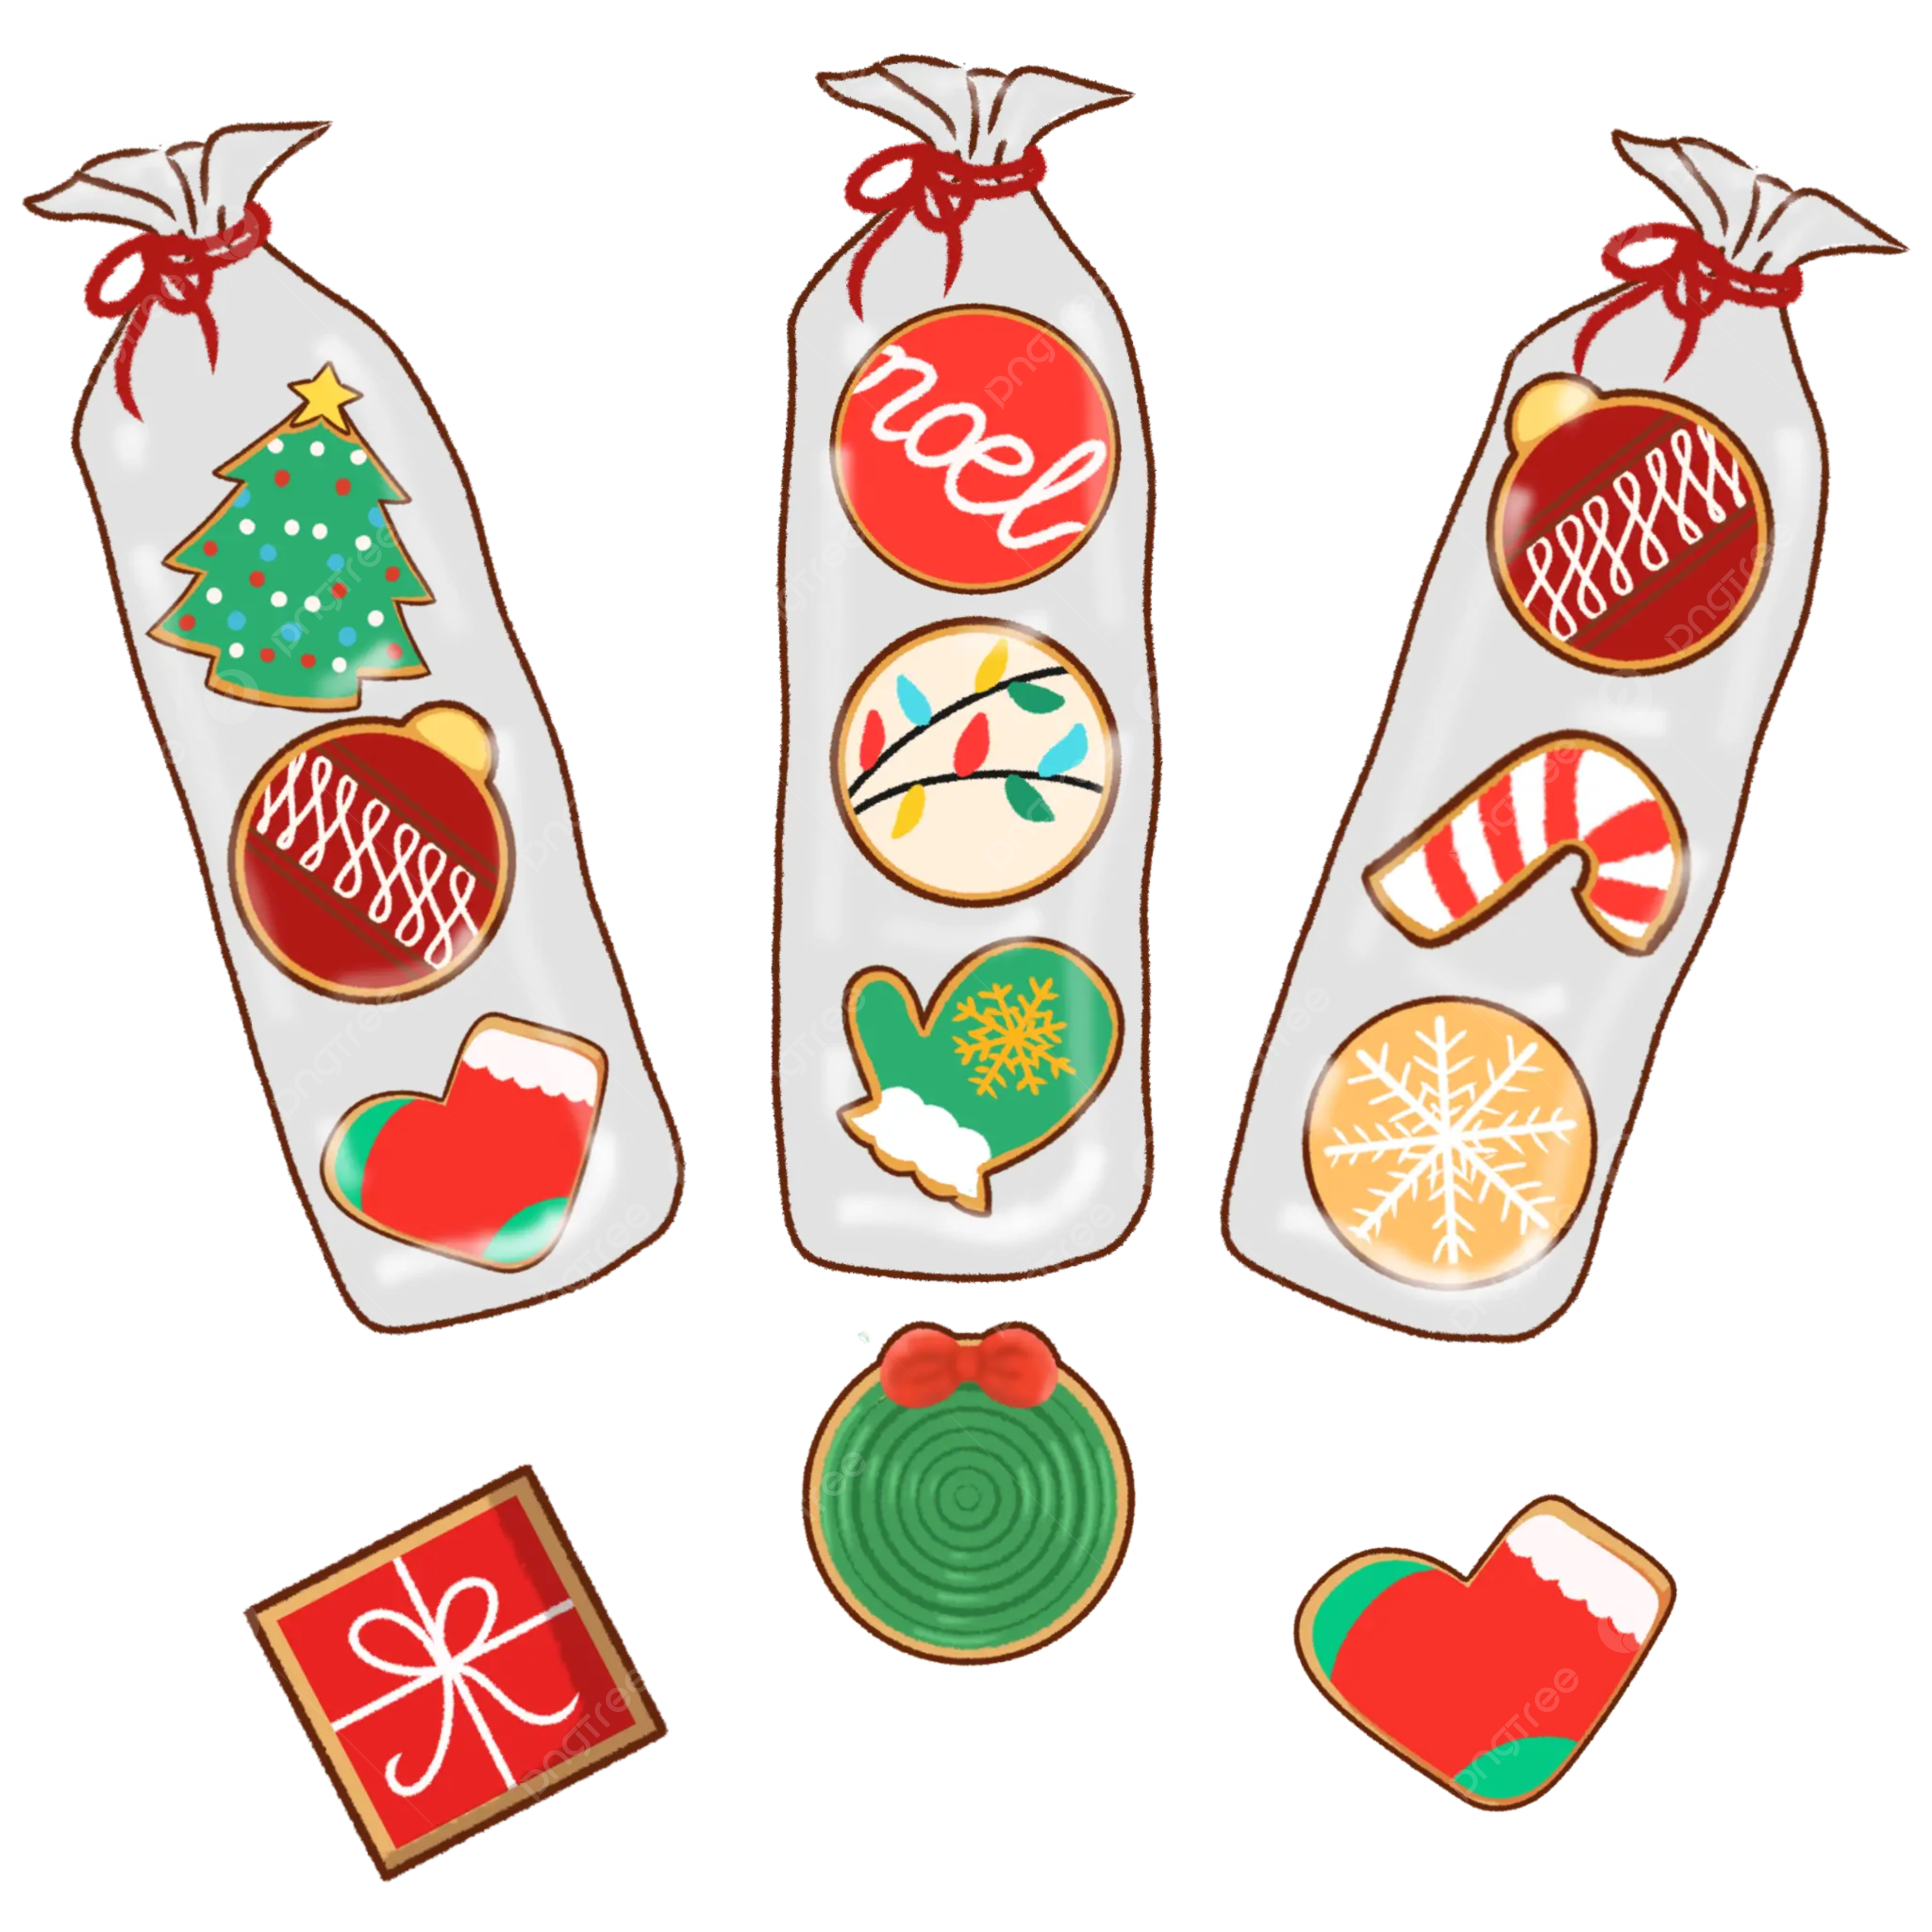 Christmas gingerbread man vector art png images free download on